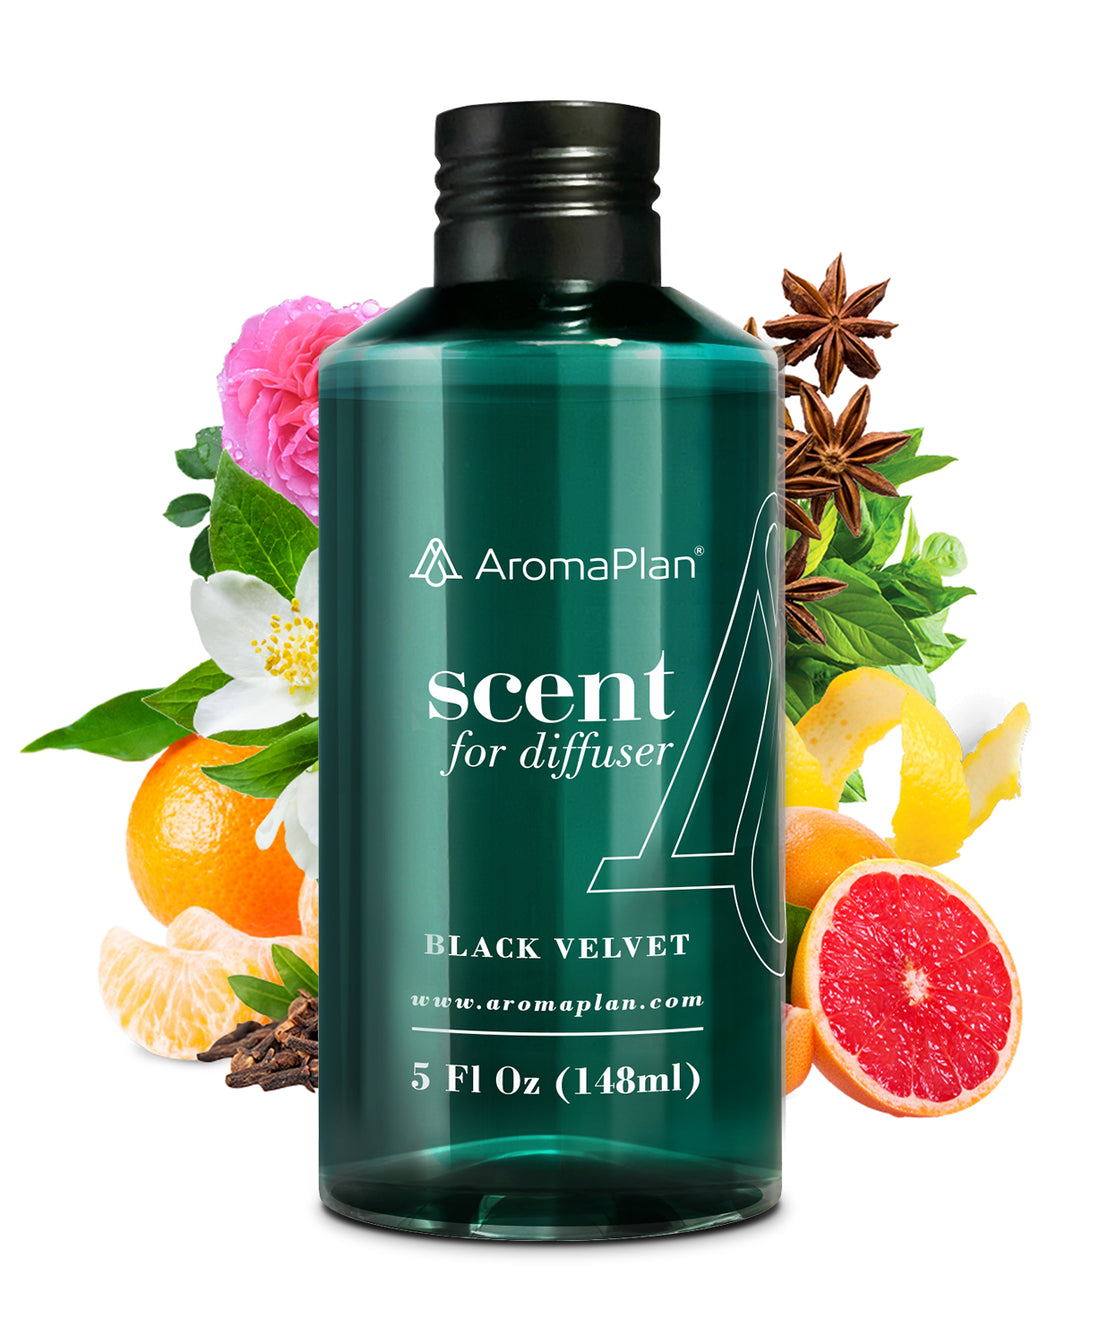 Discover the Scent Black Velvet (Inspired by The Edition Hotel New York) Fragrance - Aroma Oil for Scent Diffusers - Natural &amp; Vegan - Essential Oil Blends for Diffuser - Size: 5 Fl Oz. (148ml)